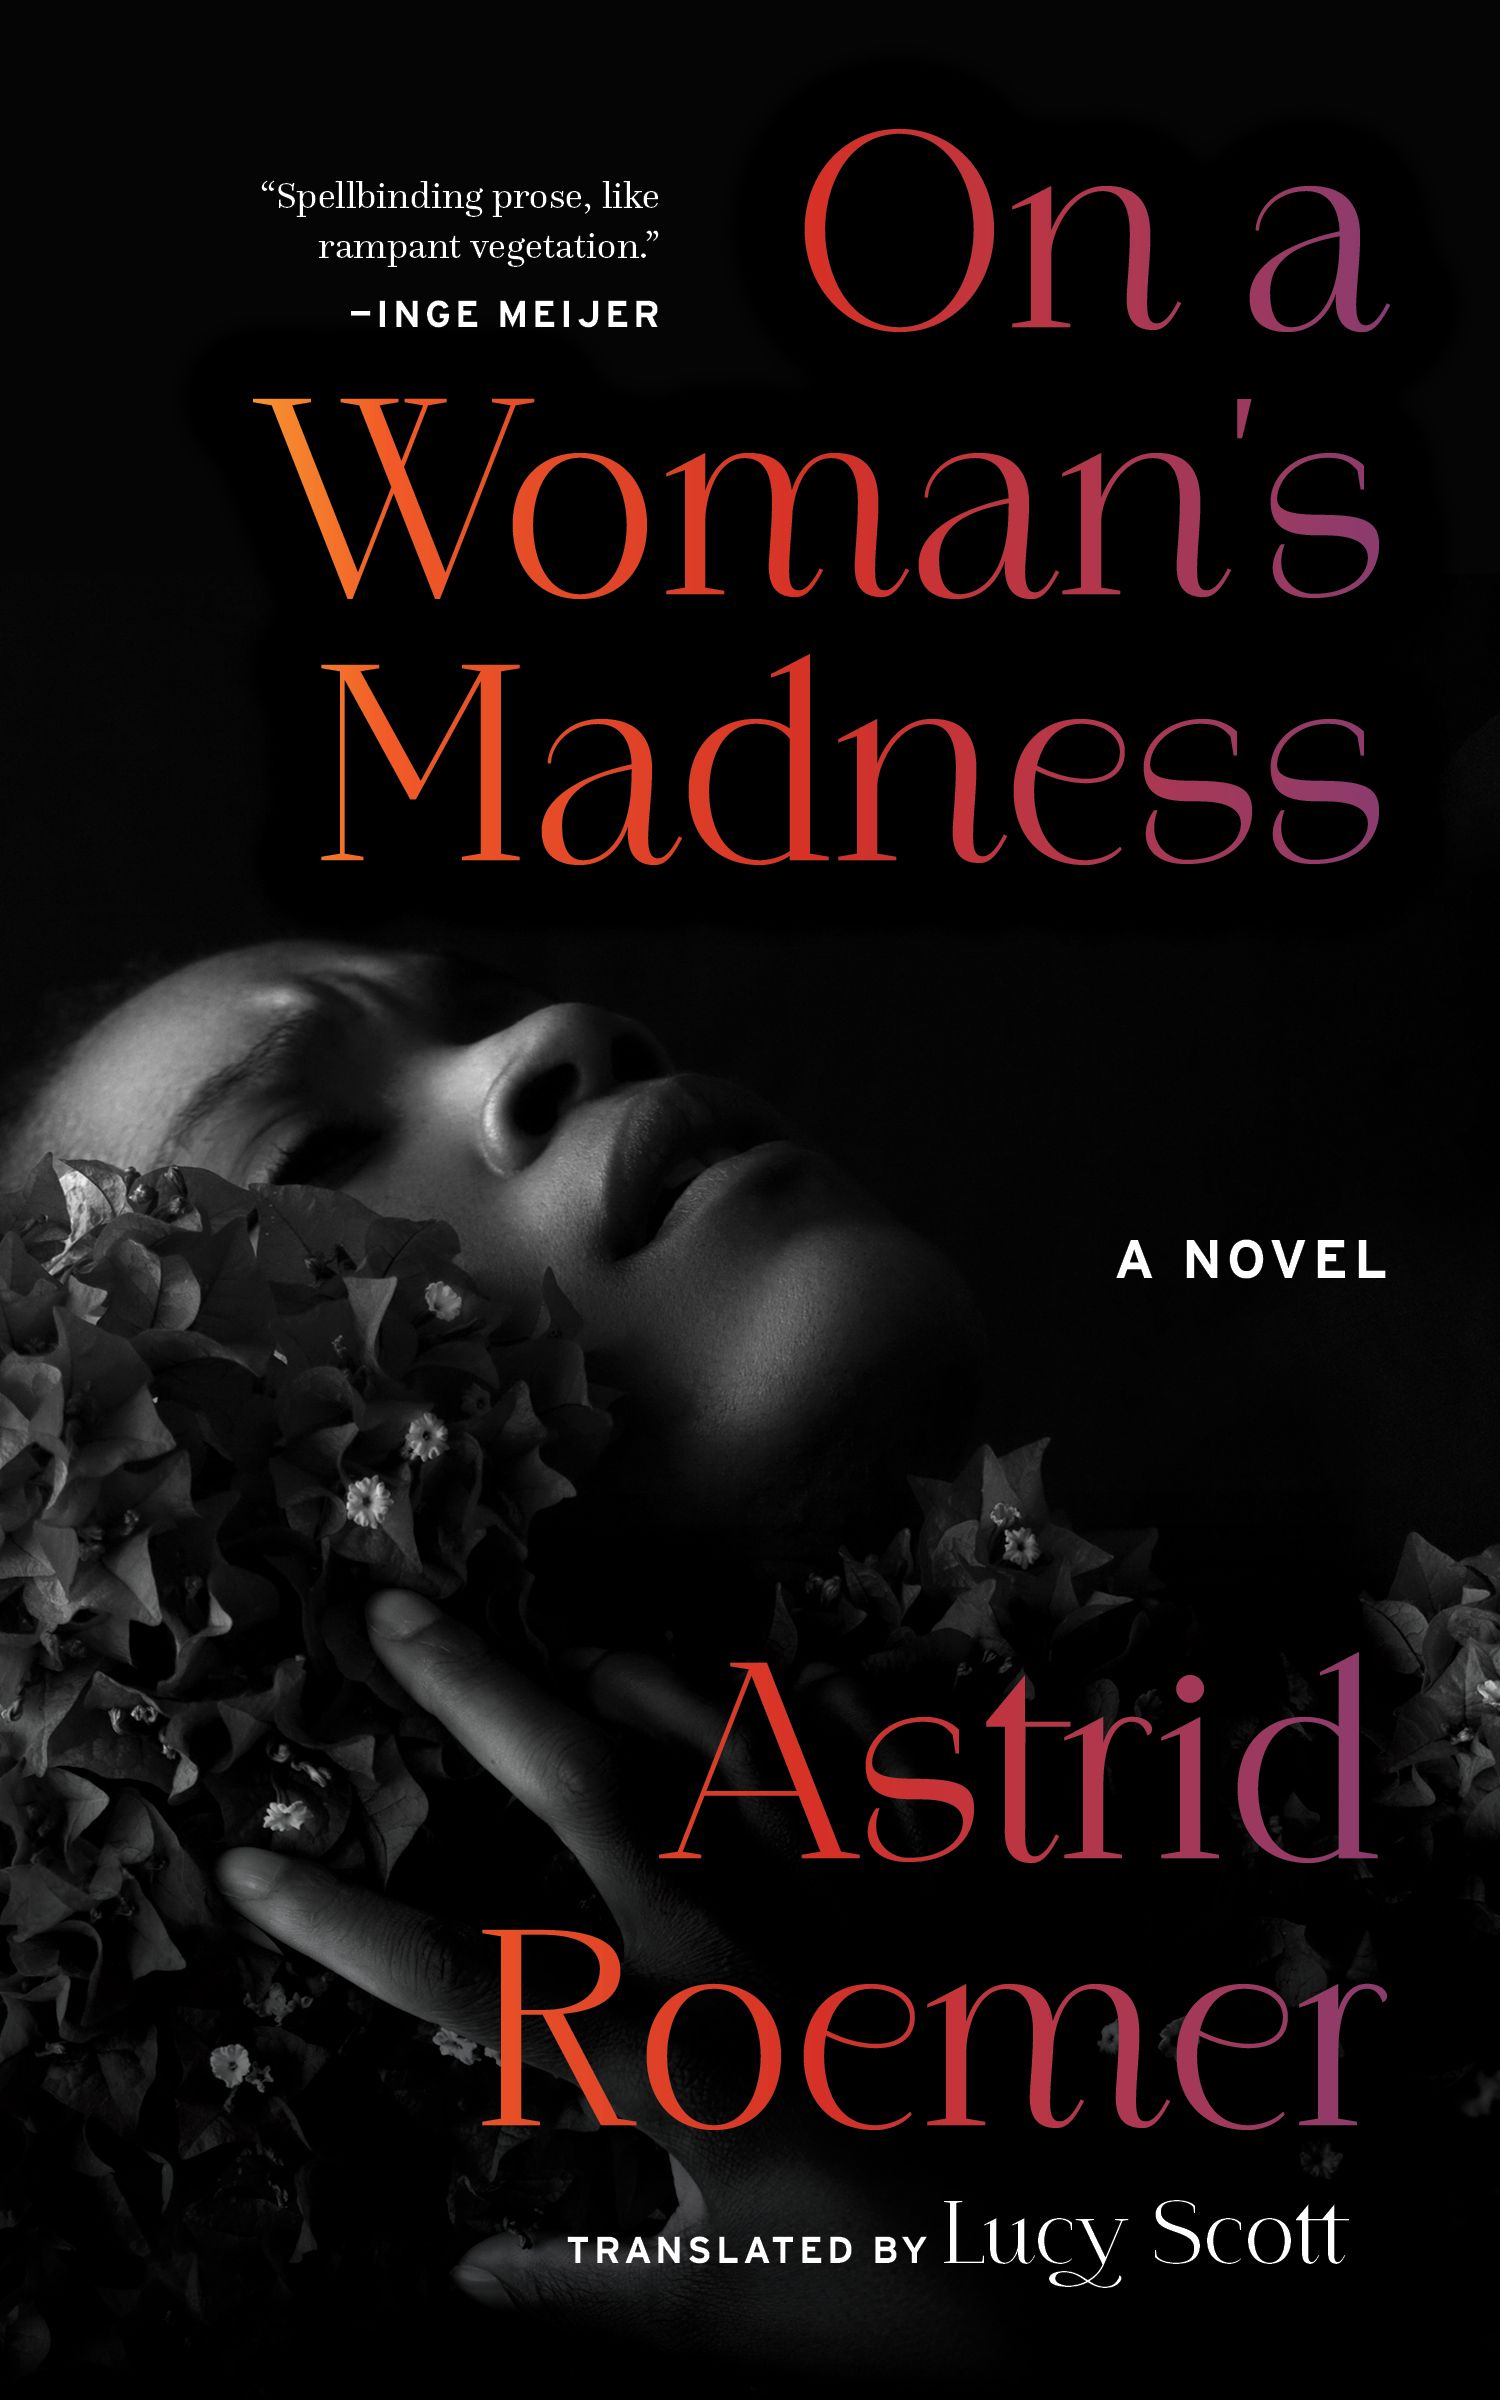 On a Woman's Madness by Astrid Roemer book cover